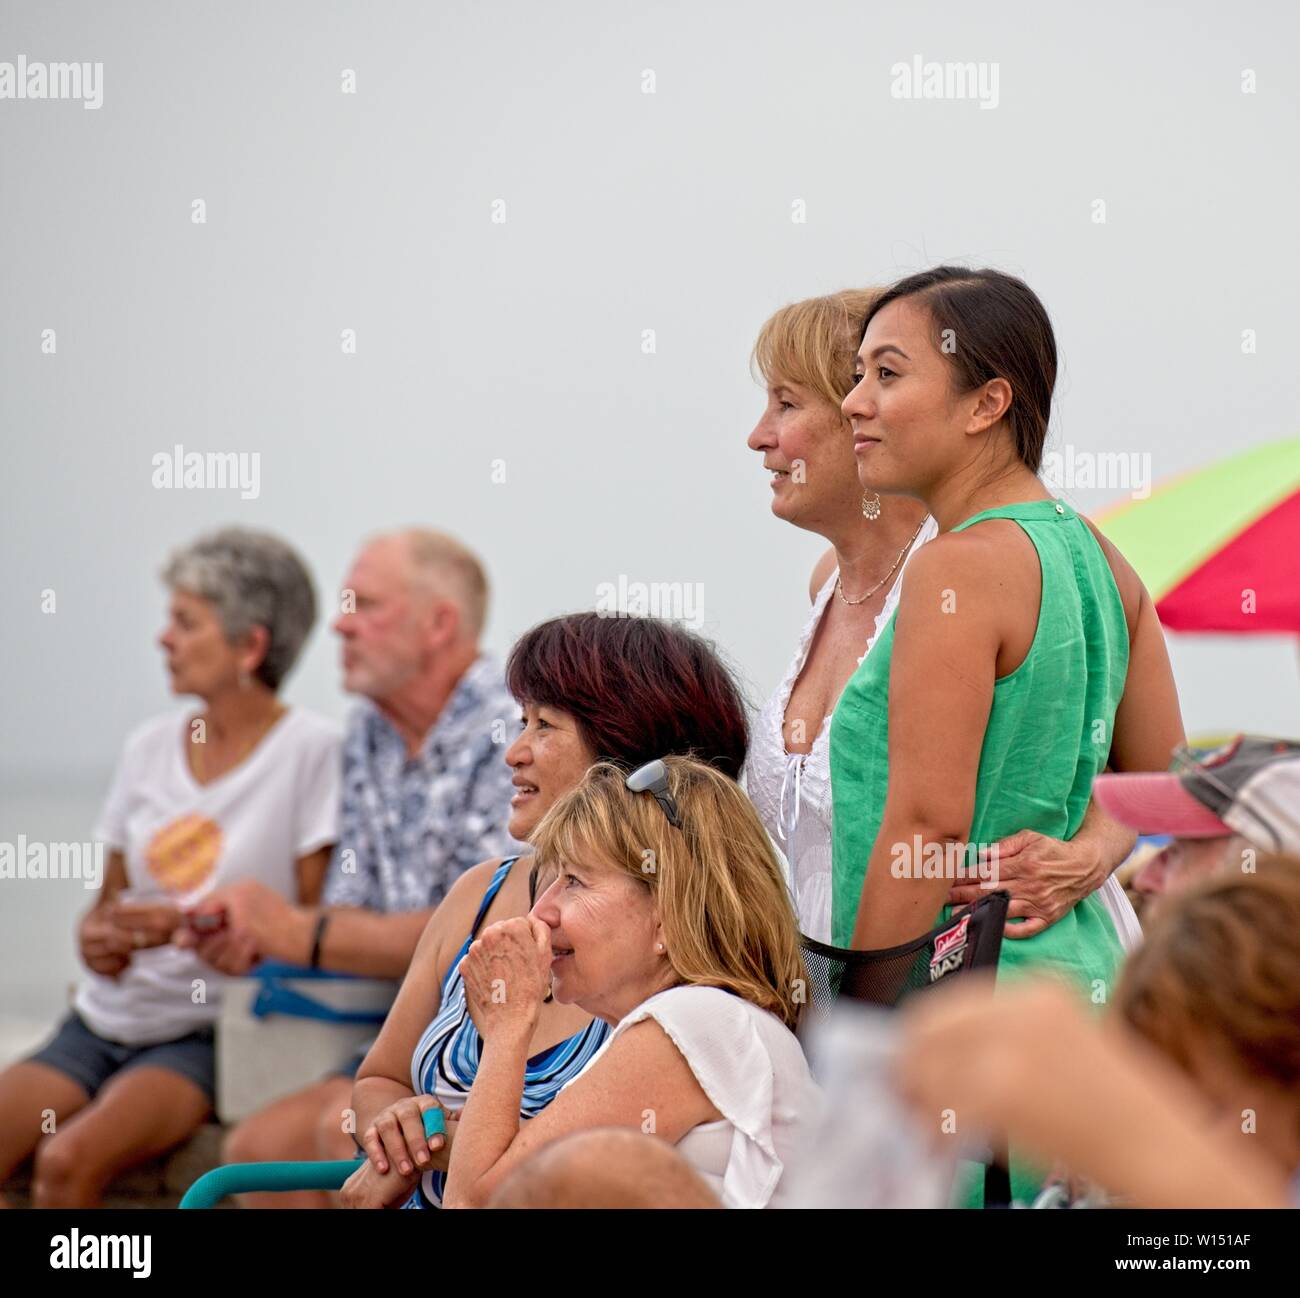 A small group of people watching a band perform at a Bands on the Beach Concert at Pensacola Beach, Florida USA Stock Photo